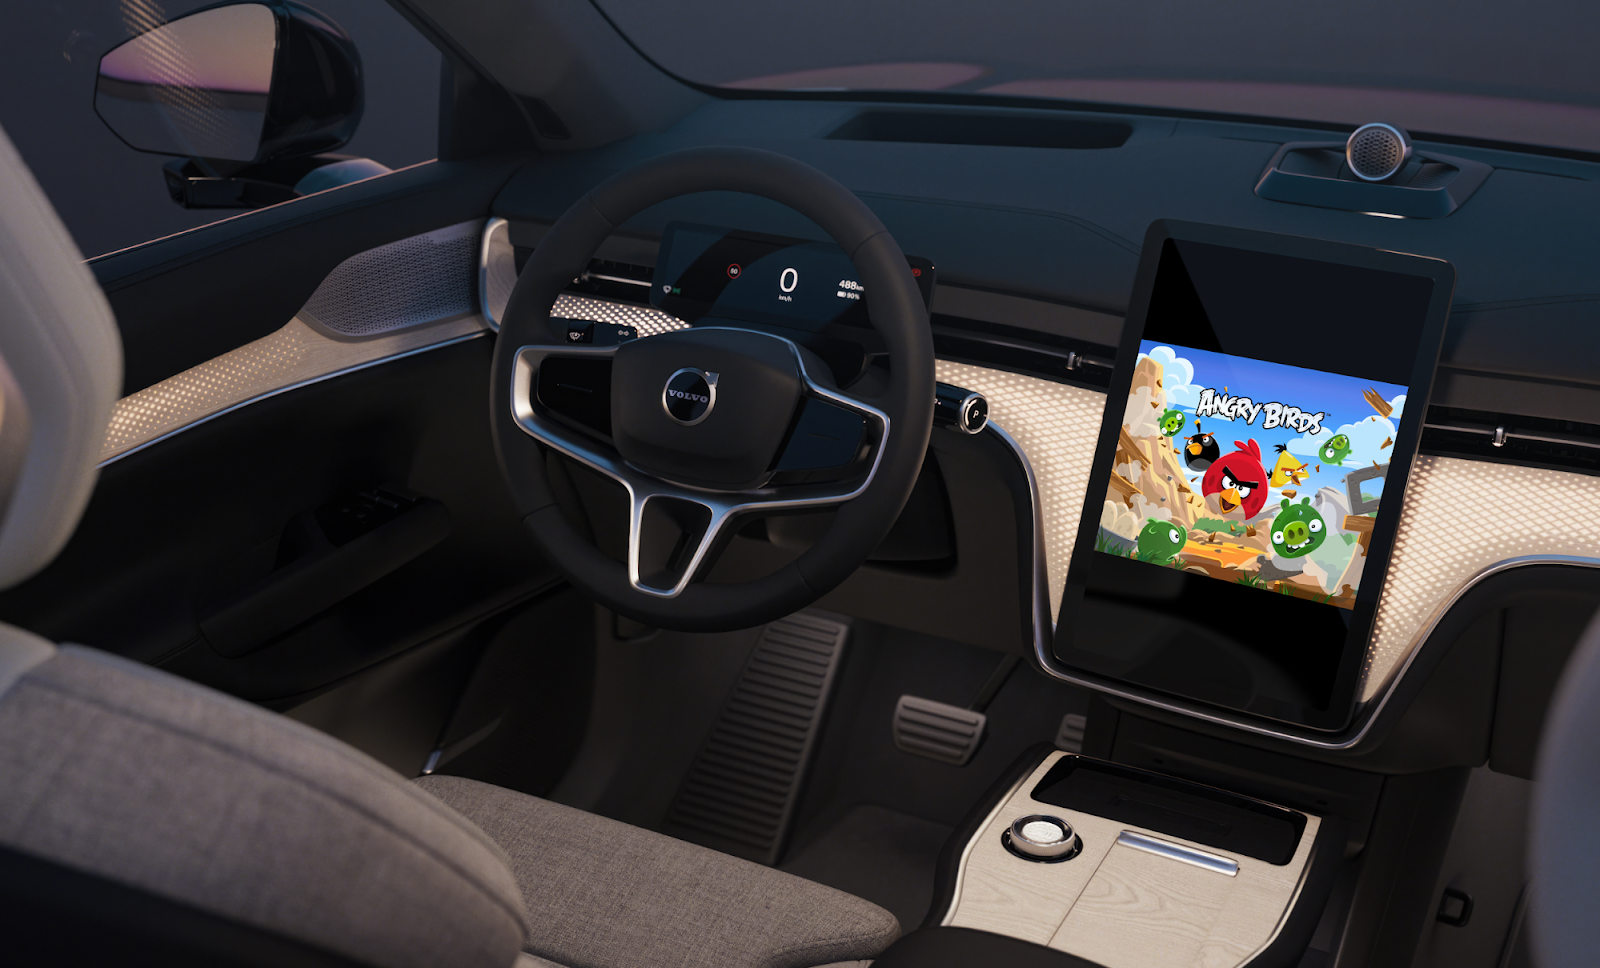 Image showing Angry Birds on a Volvo EX90 car display